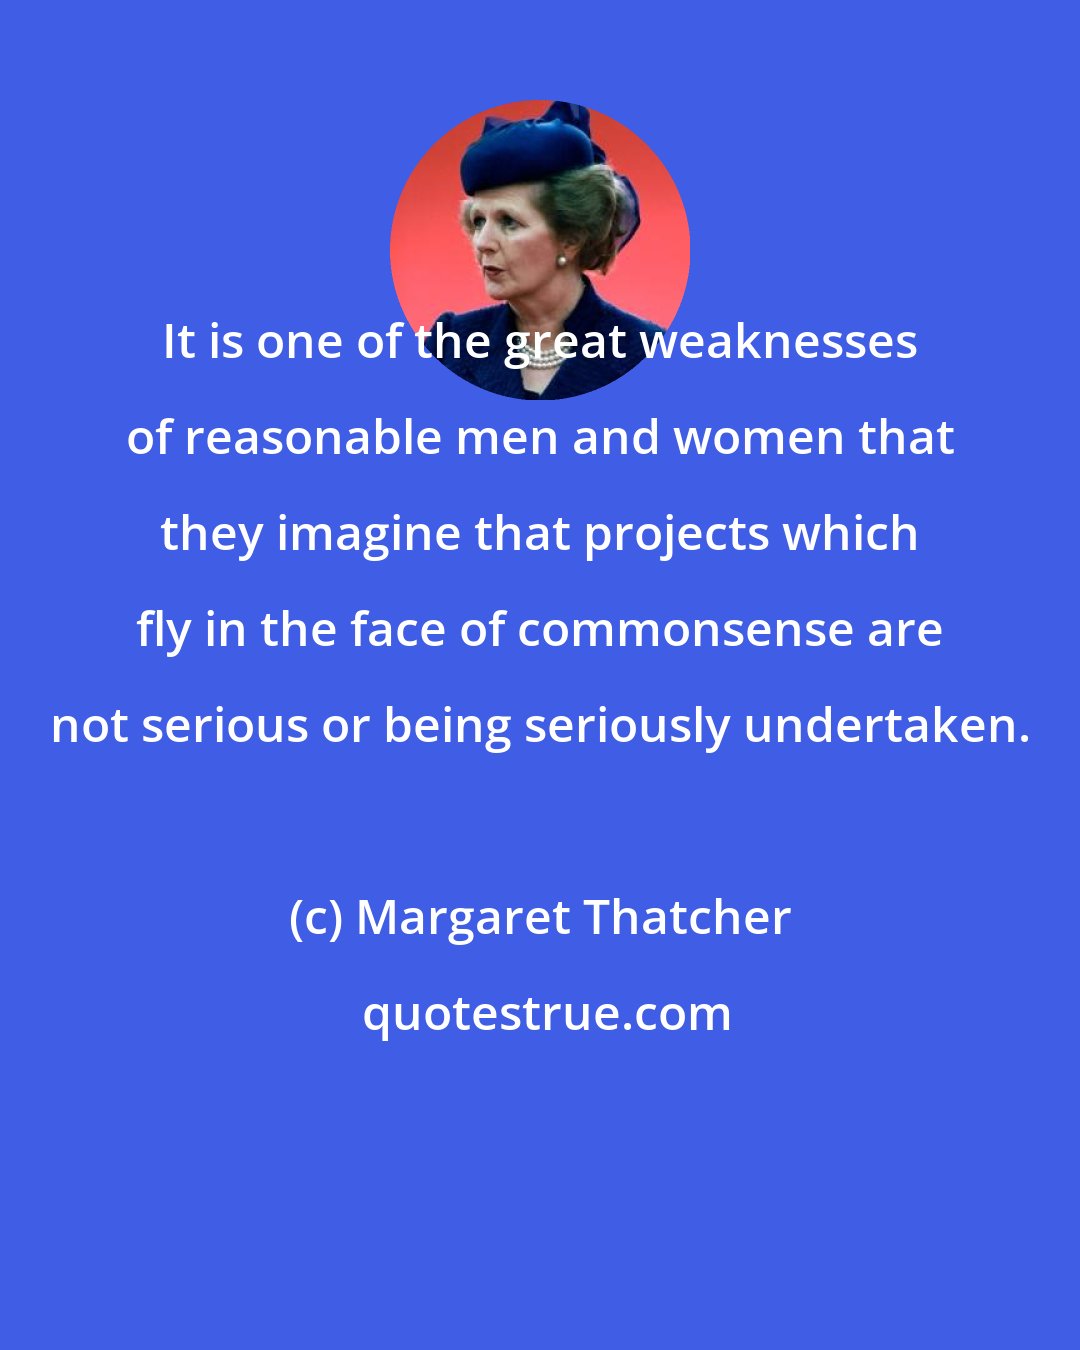 Margaret Thatcher: It is one of the great weaknesses of reasonable men and women that they imagine that projects which fly in the face of commonsense are not serious or being seriously undertaken.